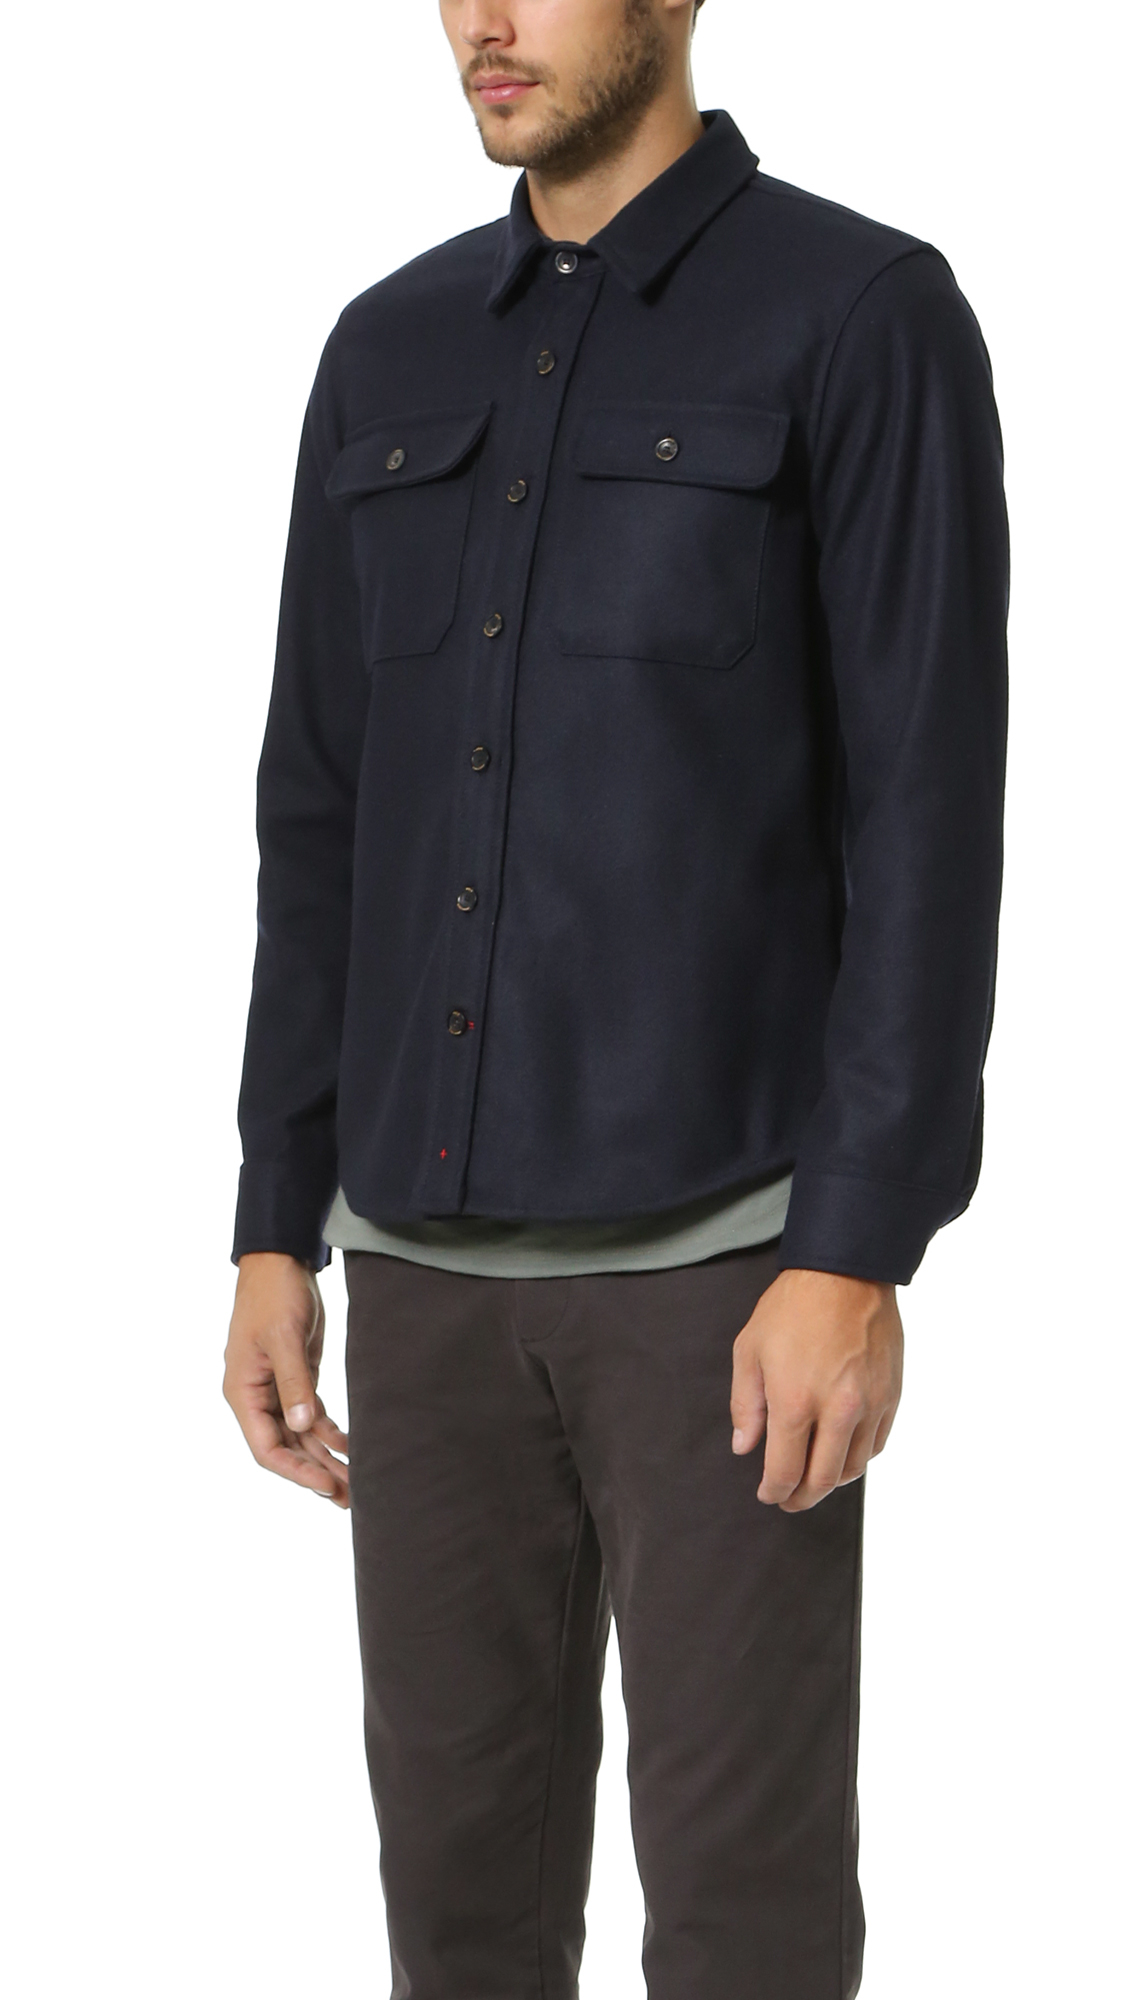 Lyst - Apolis Wool Cpo Jacket in Blue for Men